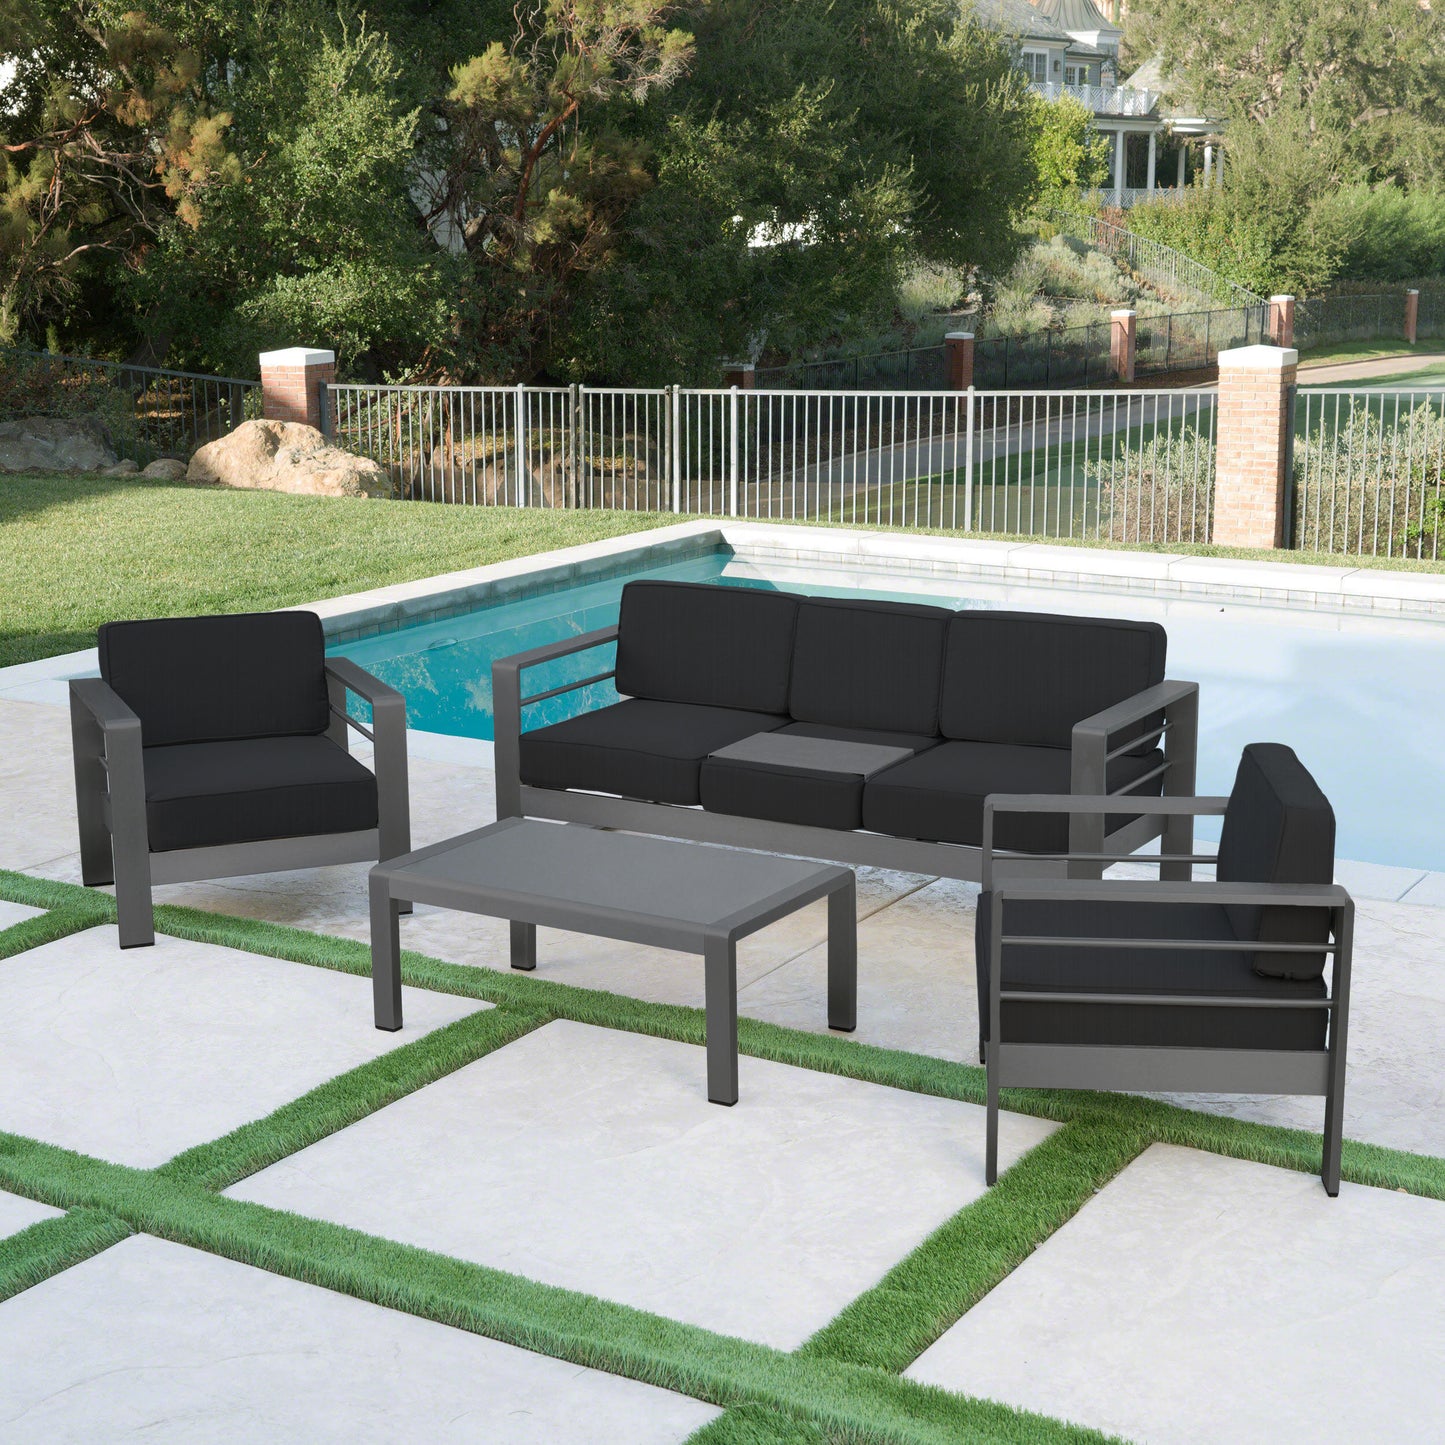 Crested Bay Outdoor Gray Aluminum 4 Piece Sofa Chat Set with Cushions